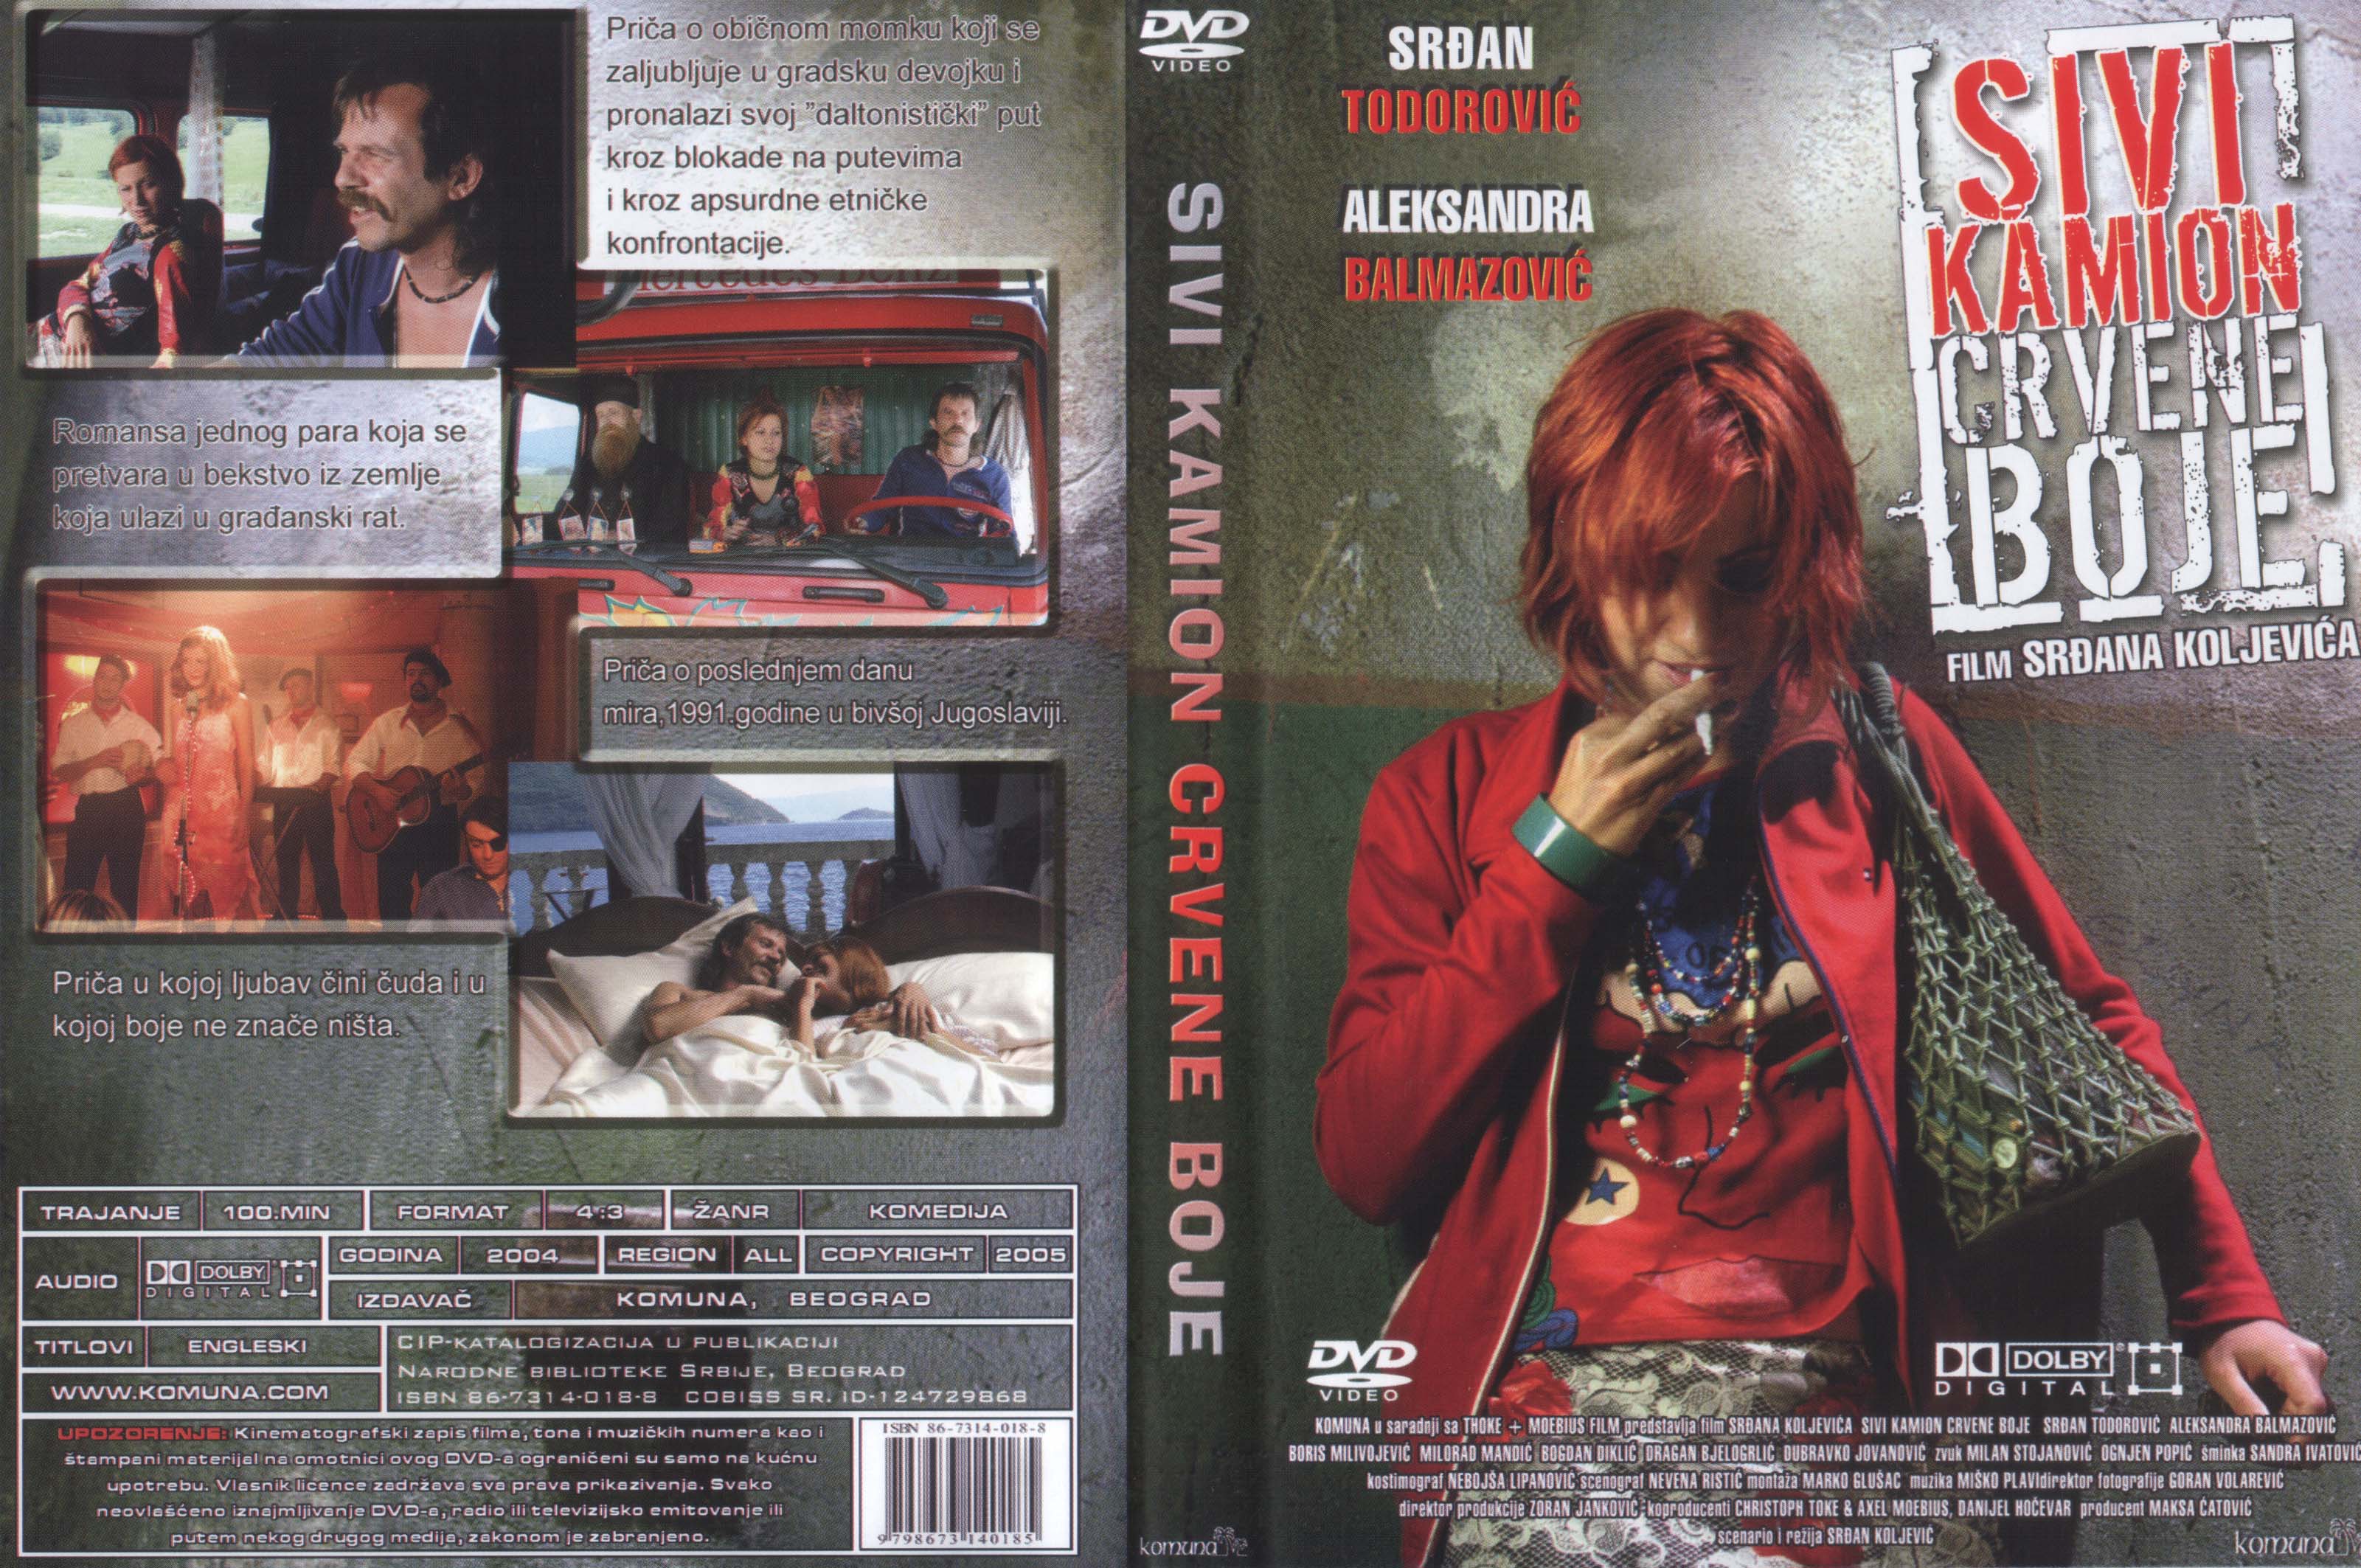 Click to view full size image -  DVD Cover - S - DVD - SIVI KAMIO CRVENE BOJE ORG. - DVD - SIVI KAMIO CRVENE BOJE ORG..jpg